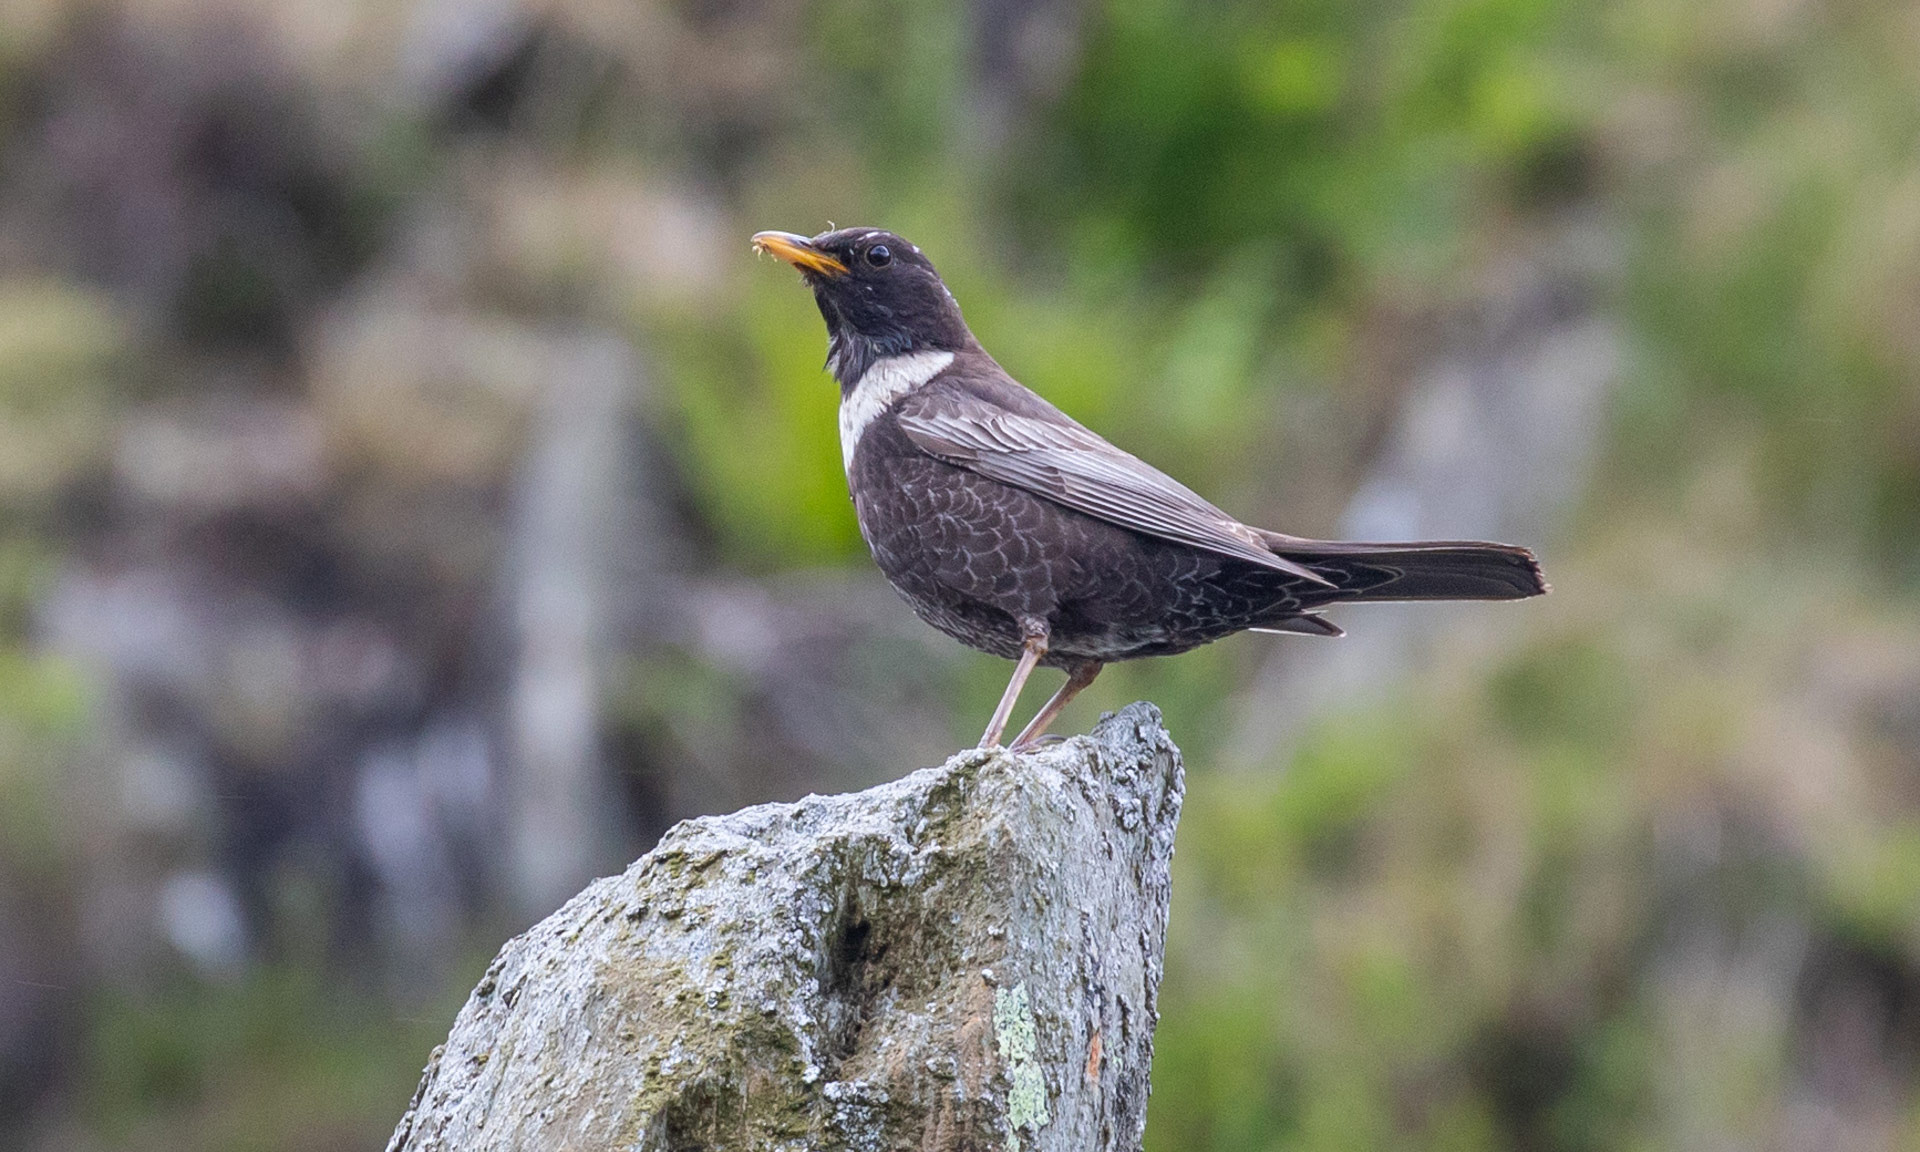 Ring ouzel perched on a rock